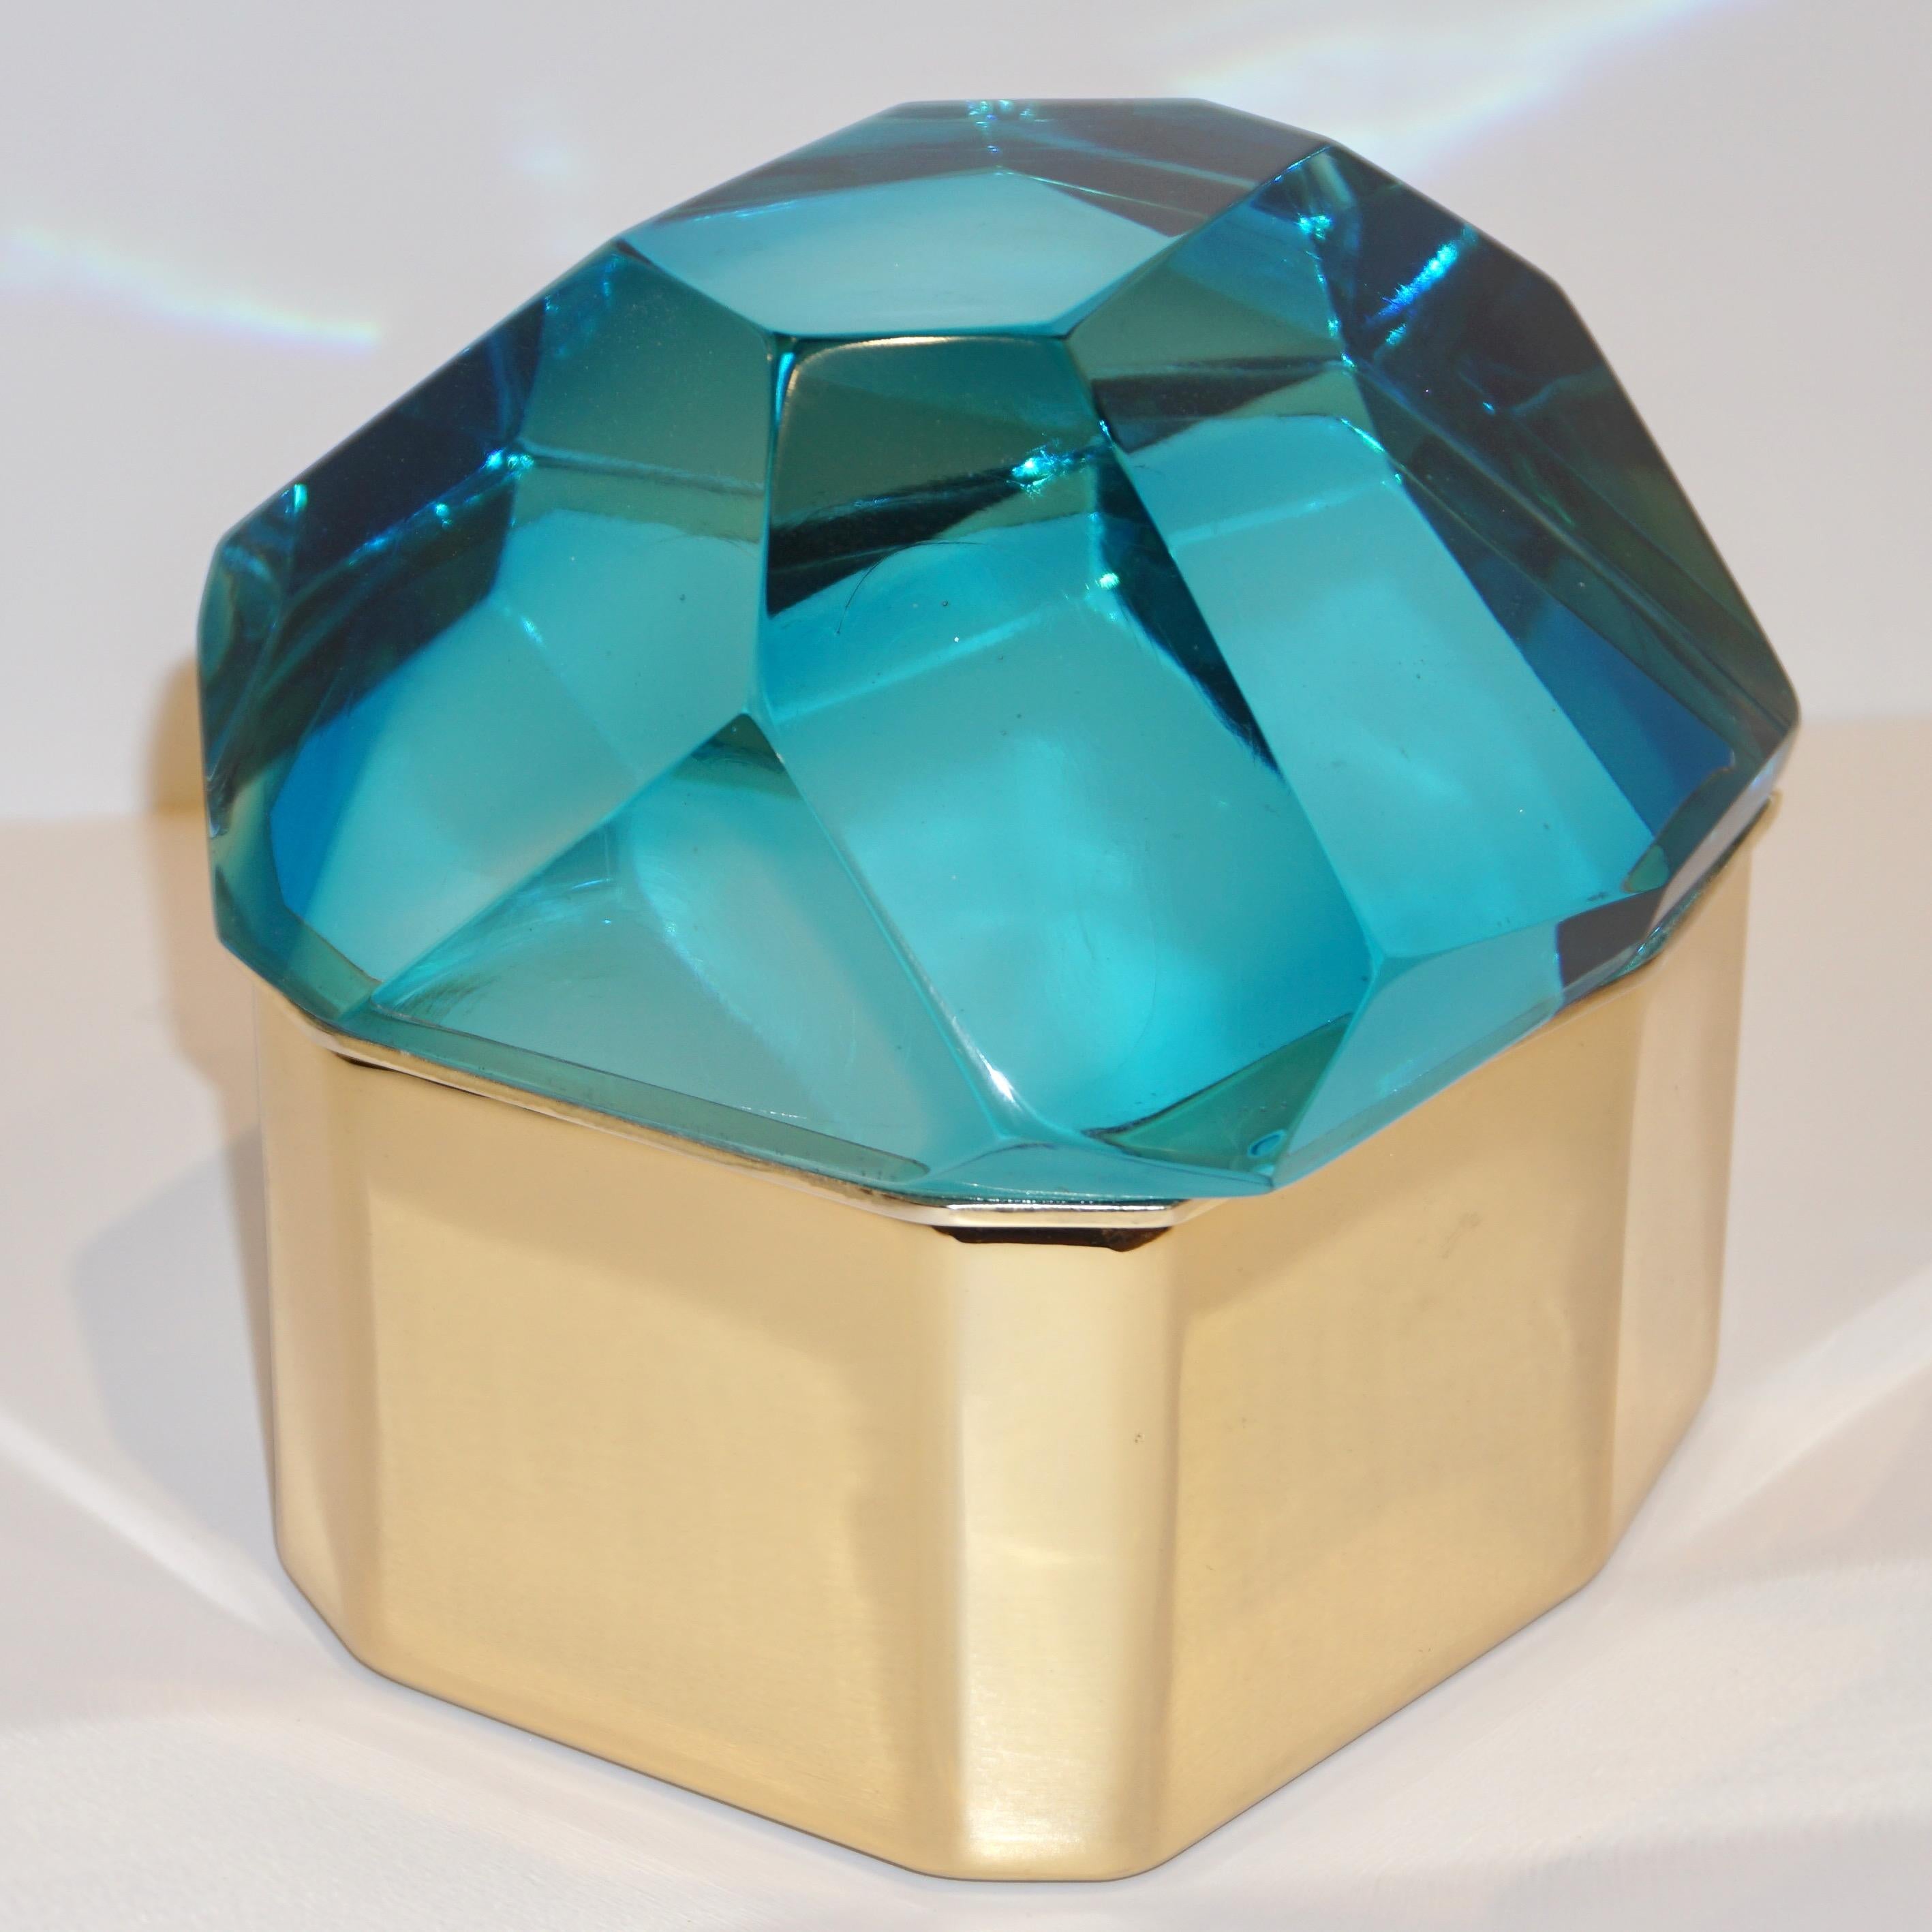 Italian contemporary organic casket, entirely handcrafted, by Toso Vetri d'Arte (Murano) with a freeform geometric brass case embellished by a turquoise blue cover in blown rock Murano glass, hand-cut like a diamond. Available also in Amber Gold and